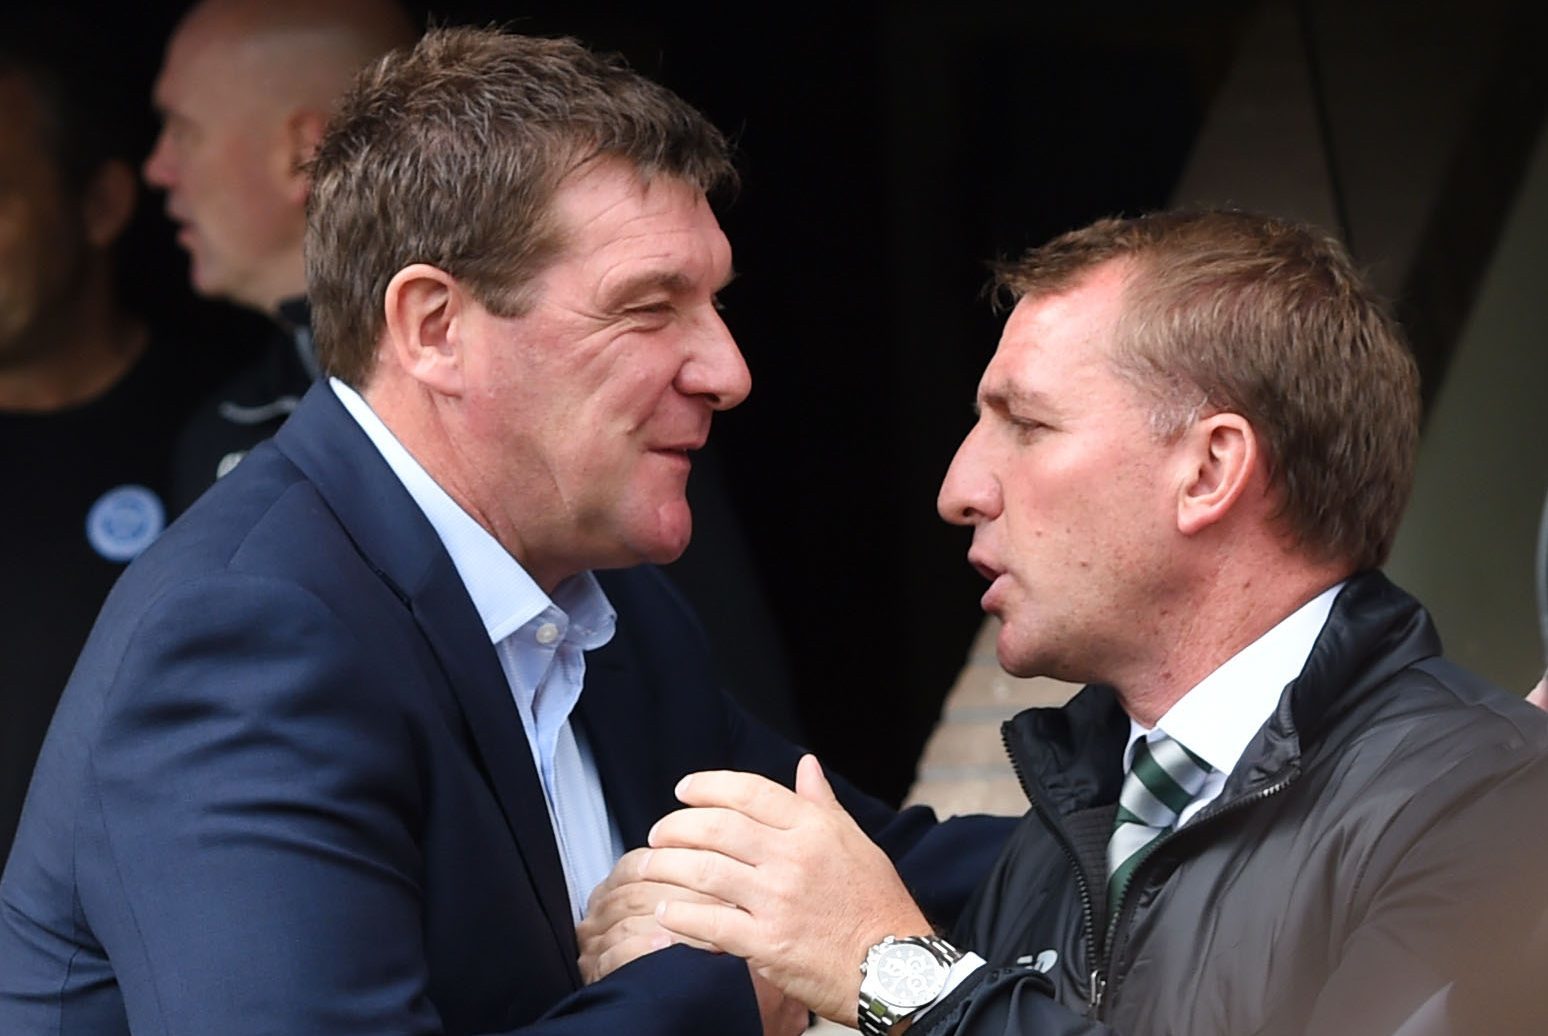 Tommy Wright and Brendan Rodgers.